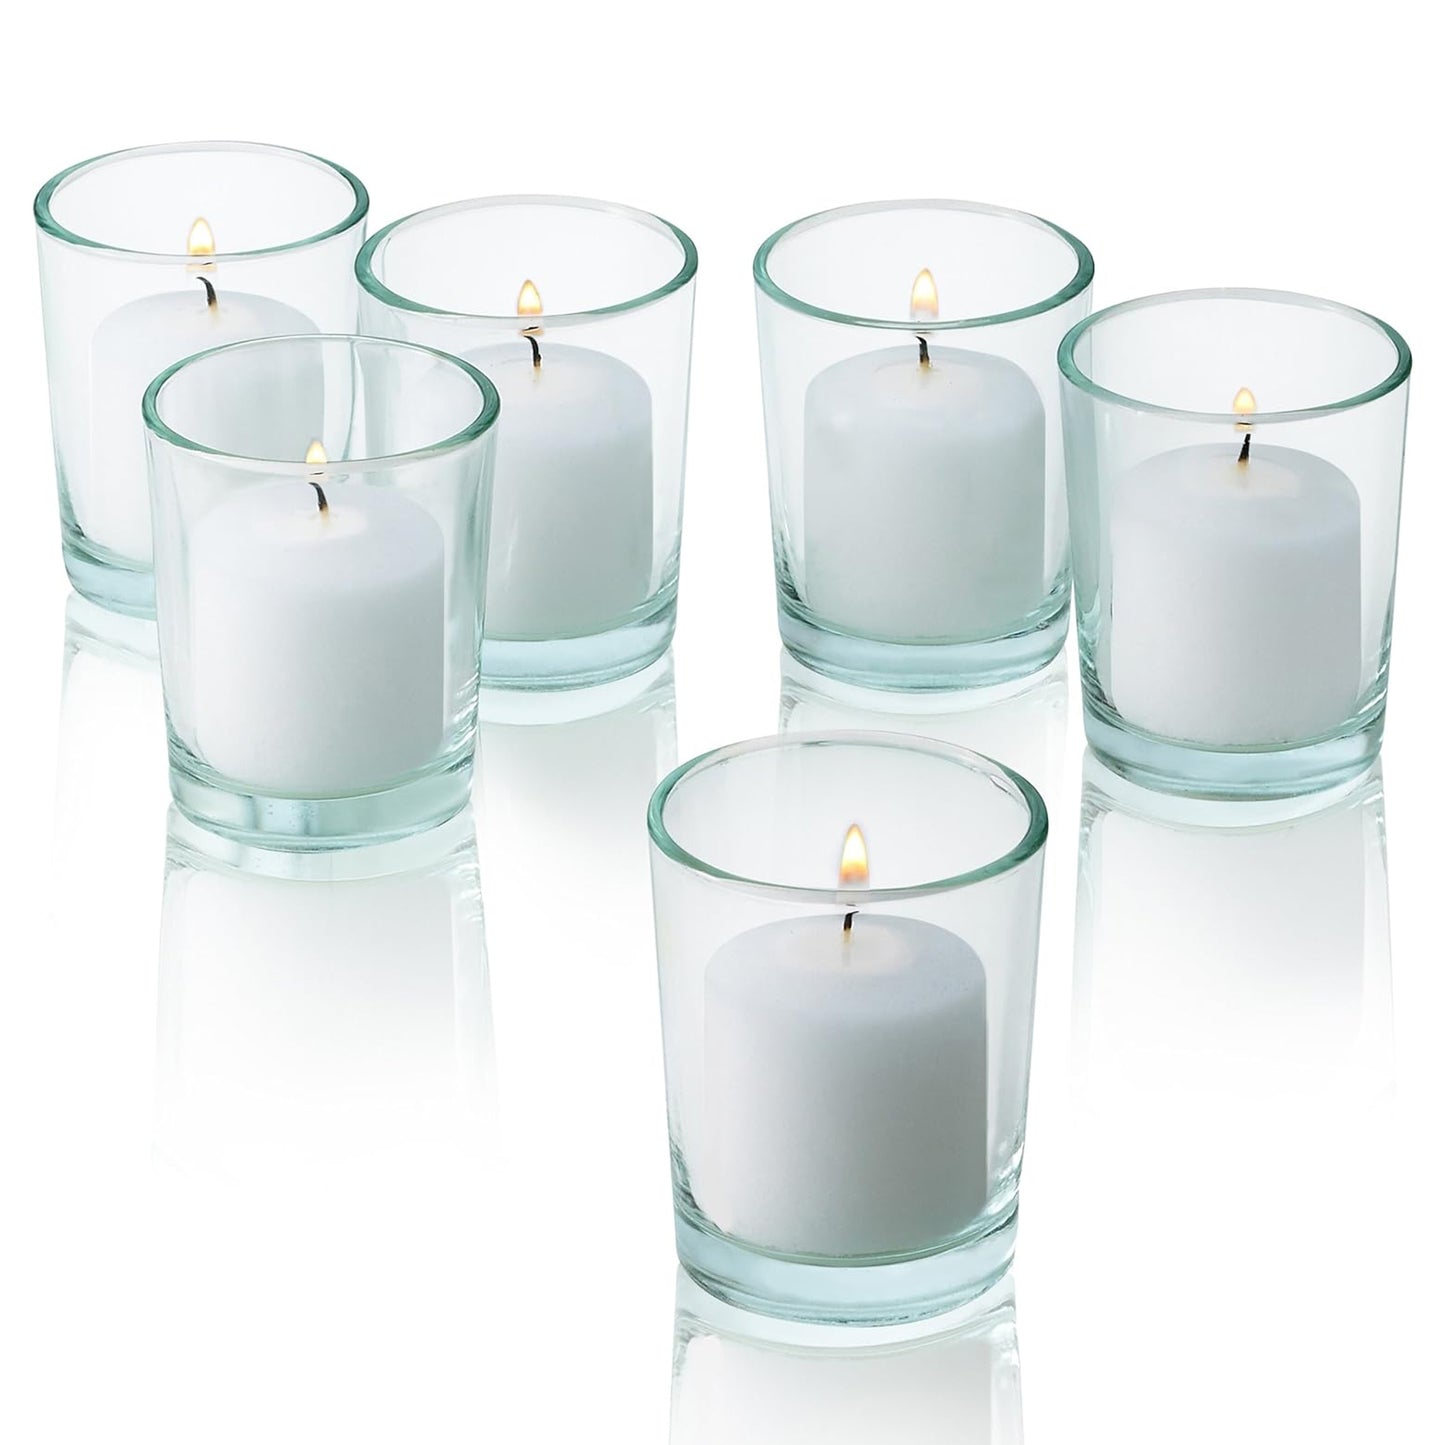 Unscented White Votive Candles,6 Hour Burn Time 1.5'' Diameter Candle For Diwali, Weddings, Parties, Spas and Decorations (Pack of 25)